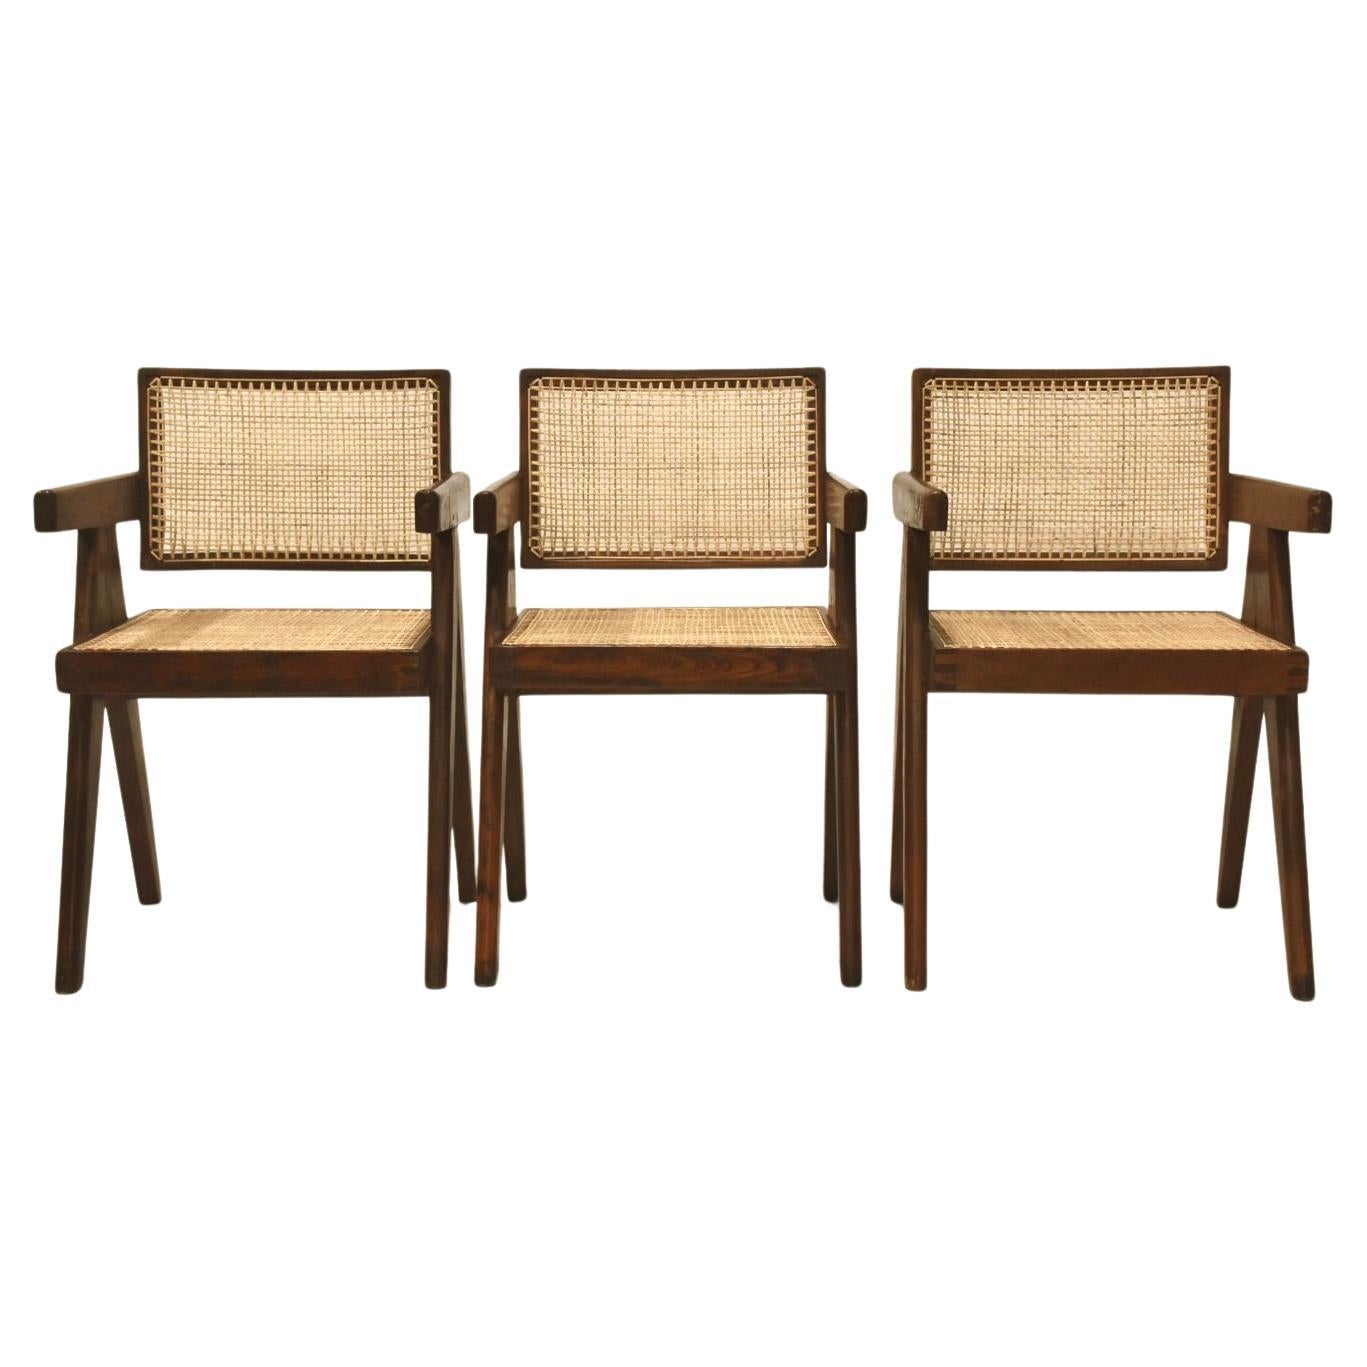 Pierre Jeanneret Set of 8 Office Cane Chairs Ca. 1955-1960 from Chandigarh For Sale 5